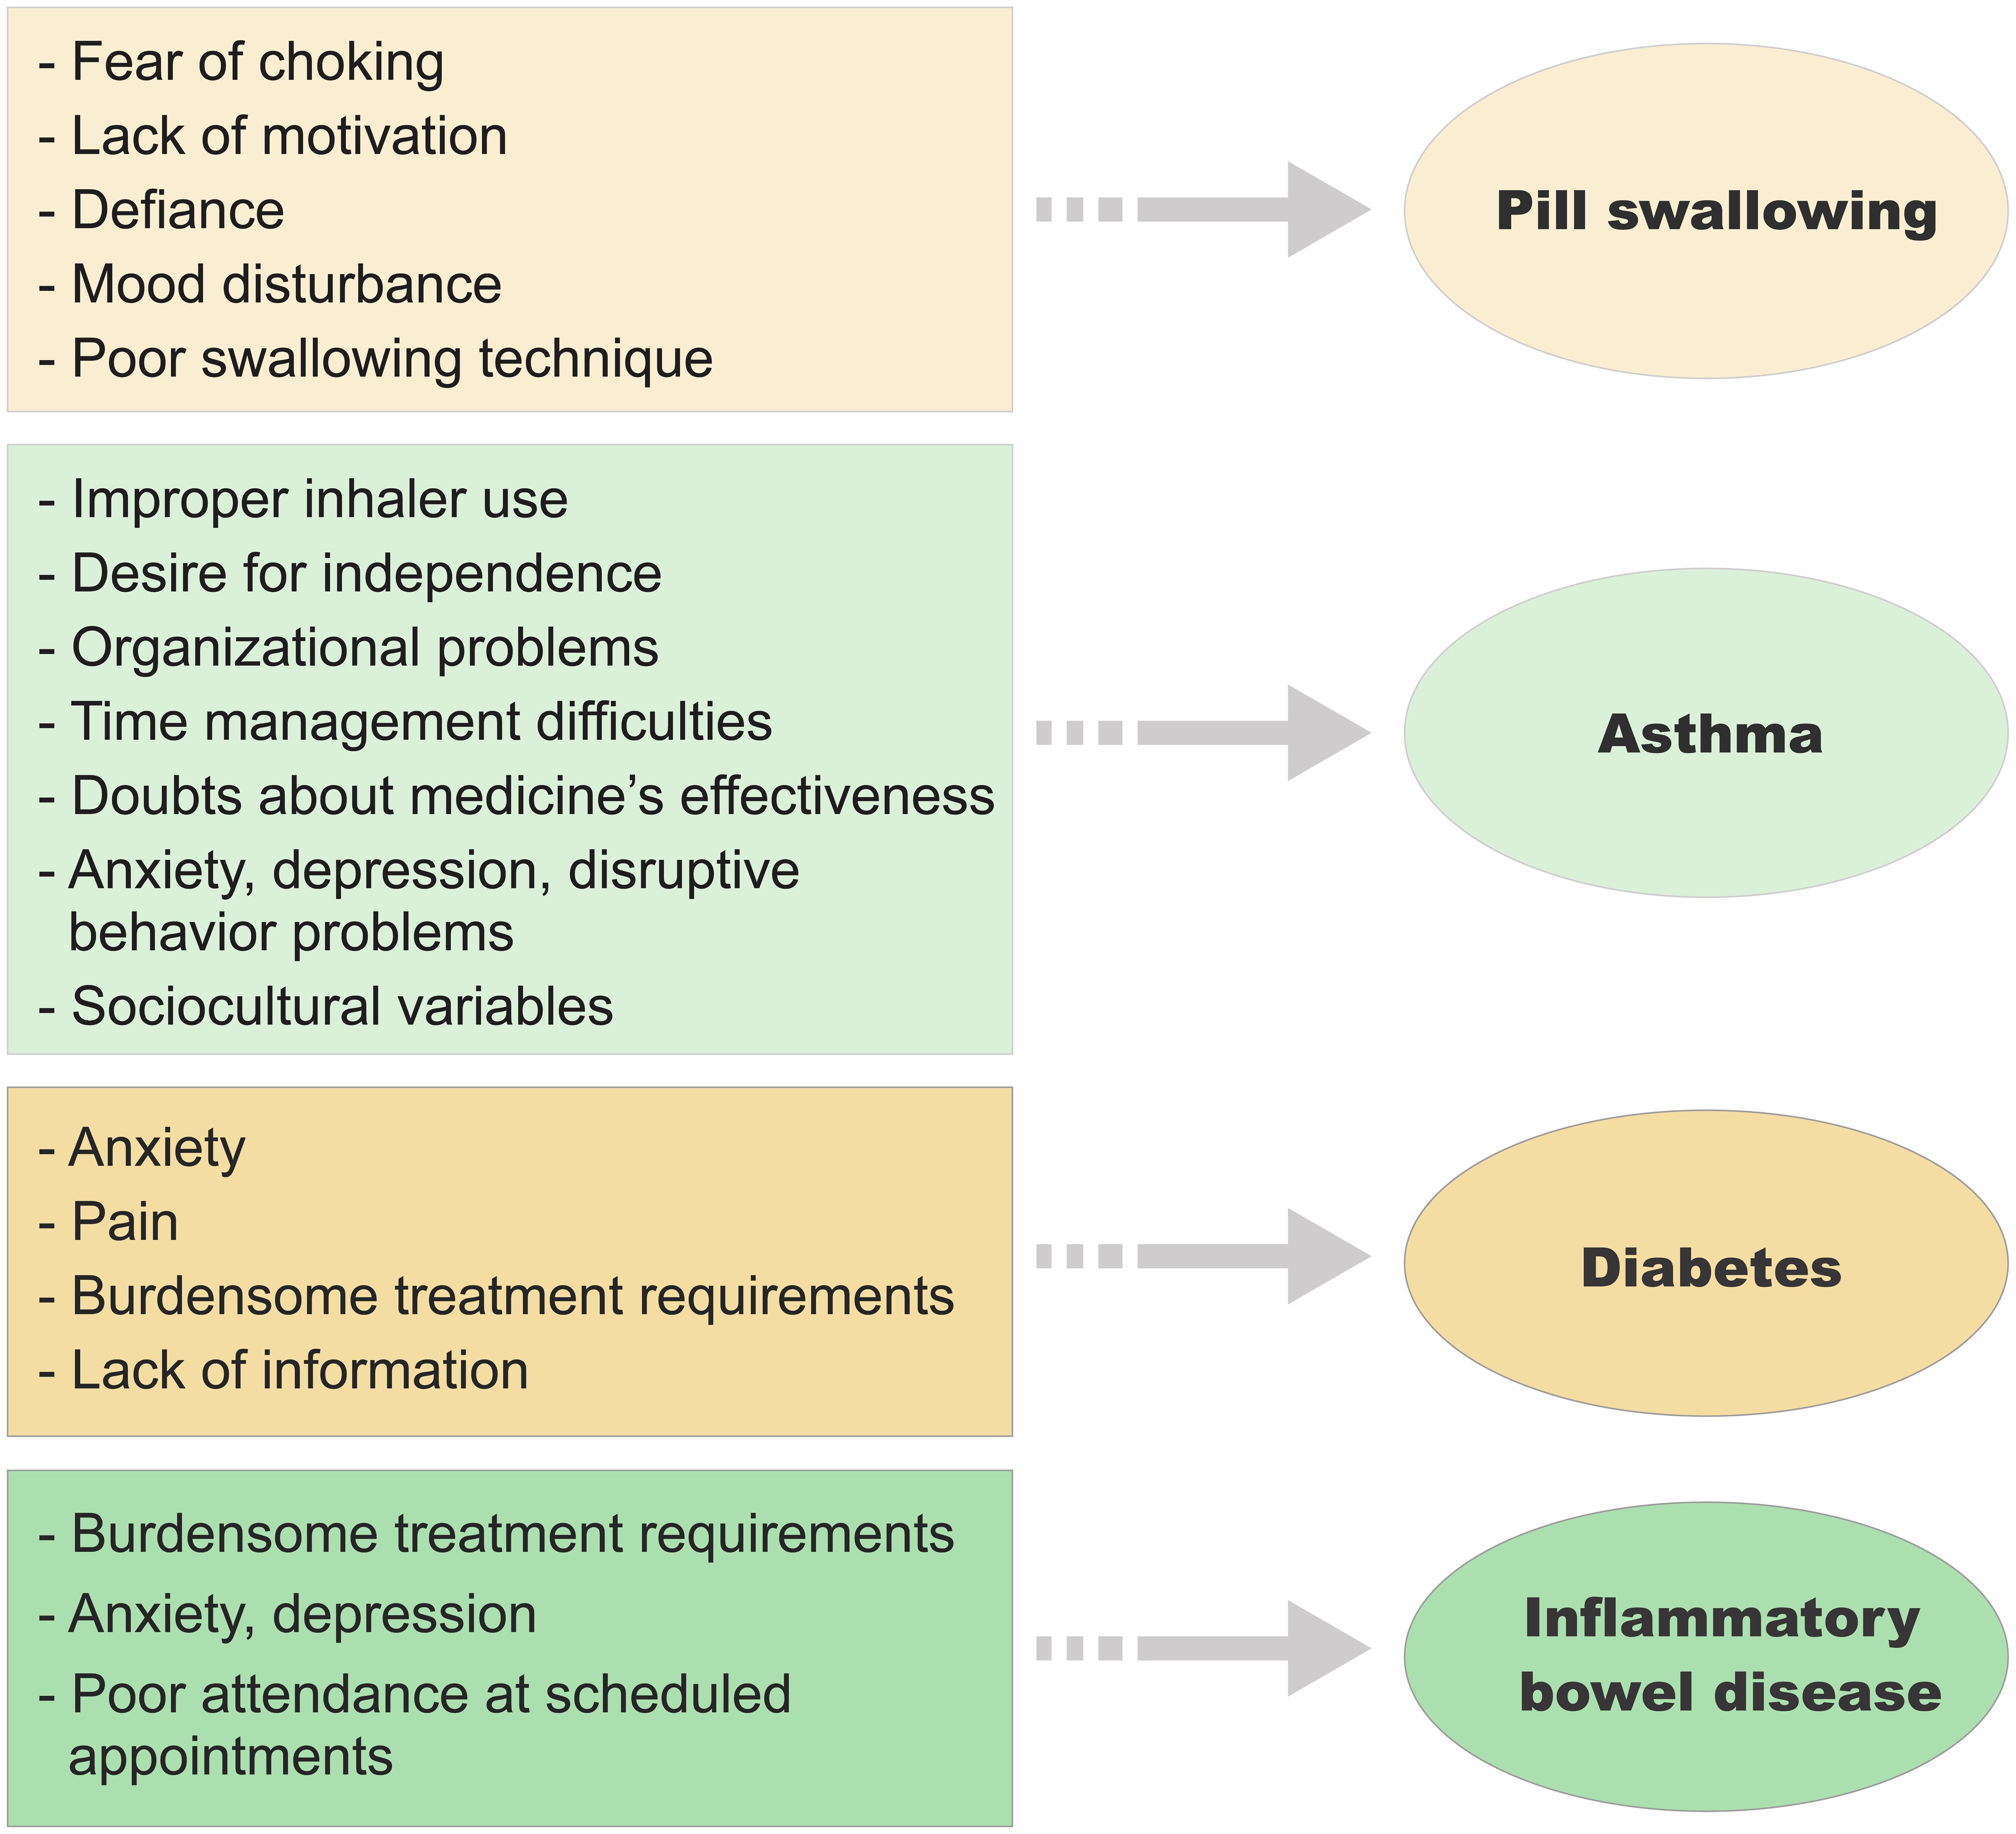 Reasons for non-adherence to medical regimens for pill swallowing, asthma, diabetes, and inflammatory bowel disease.